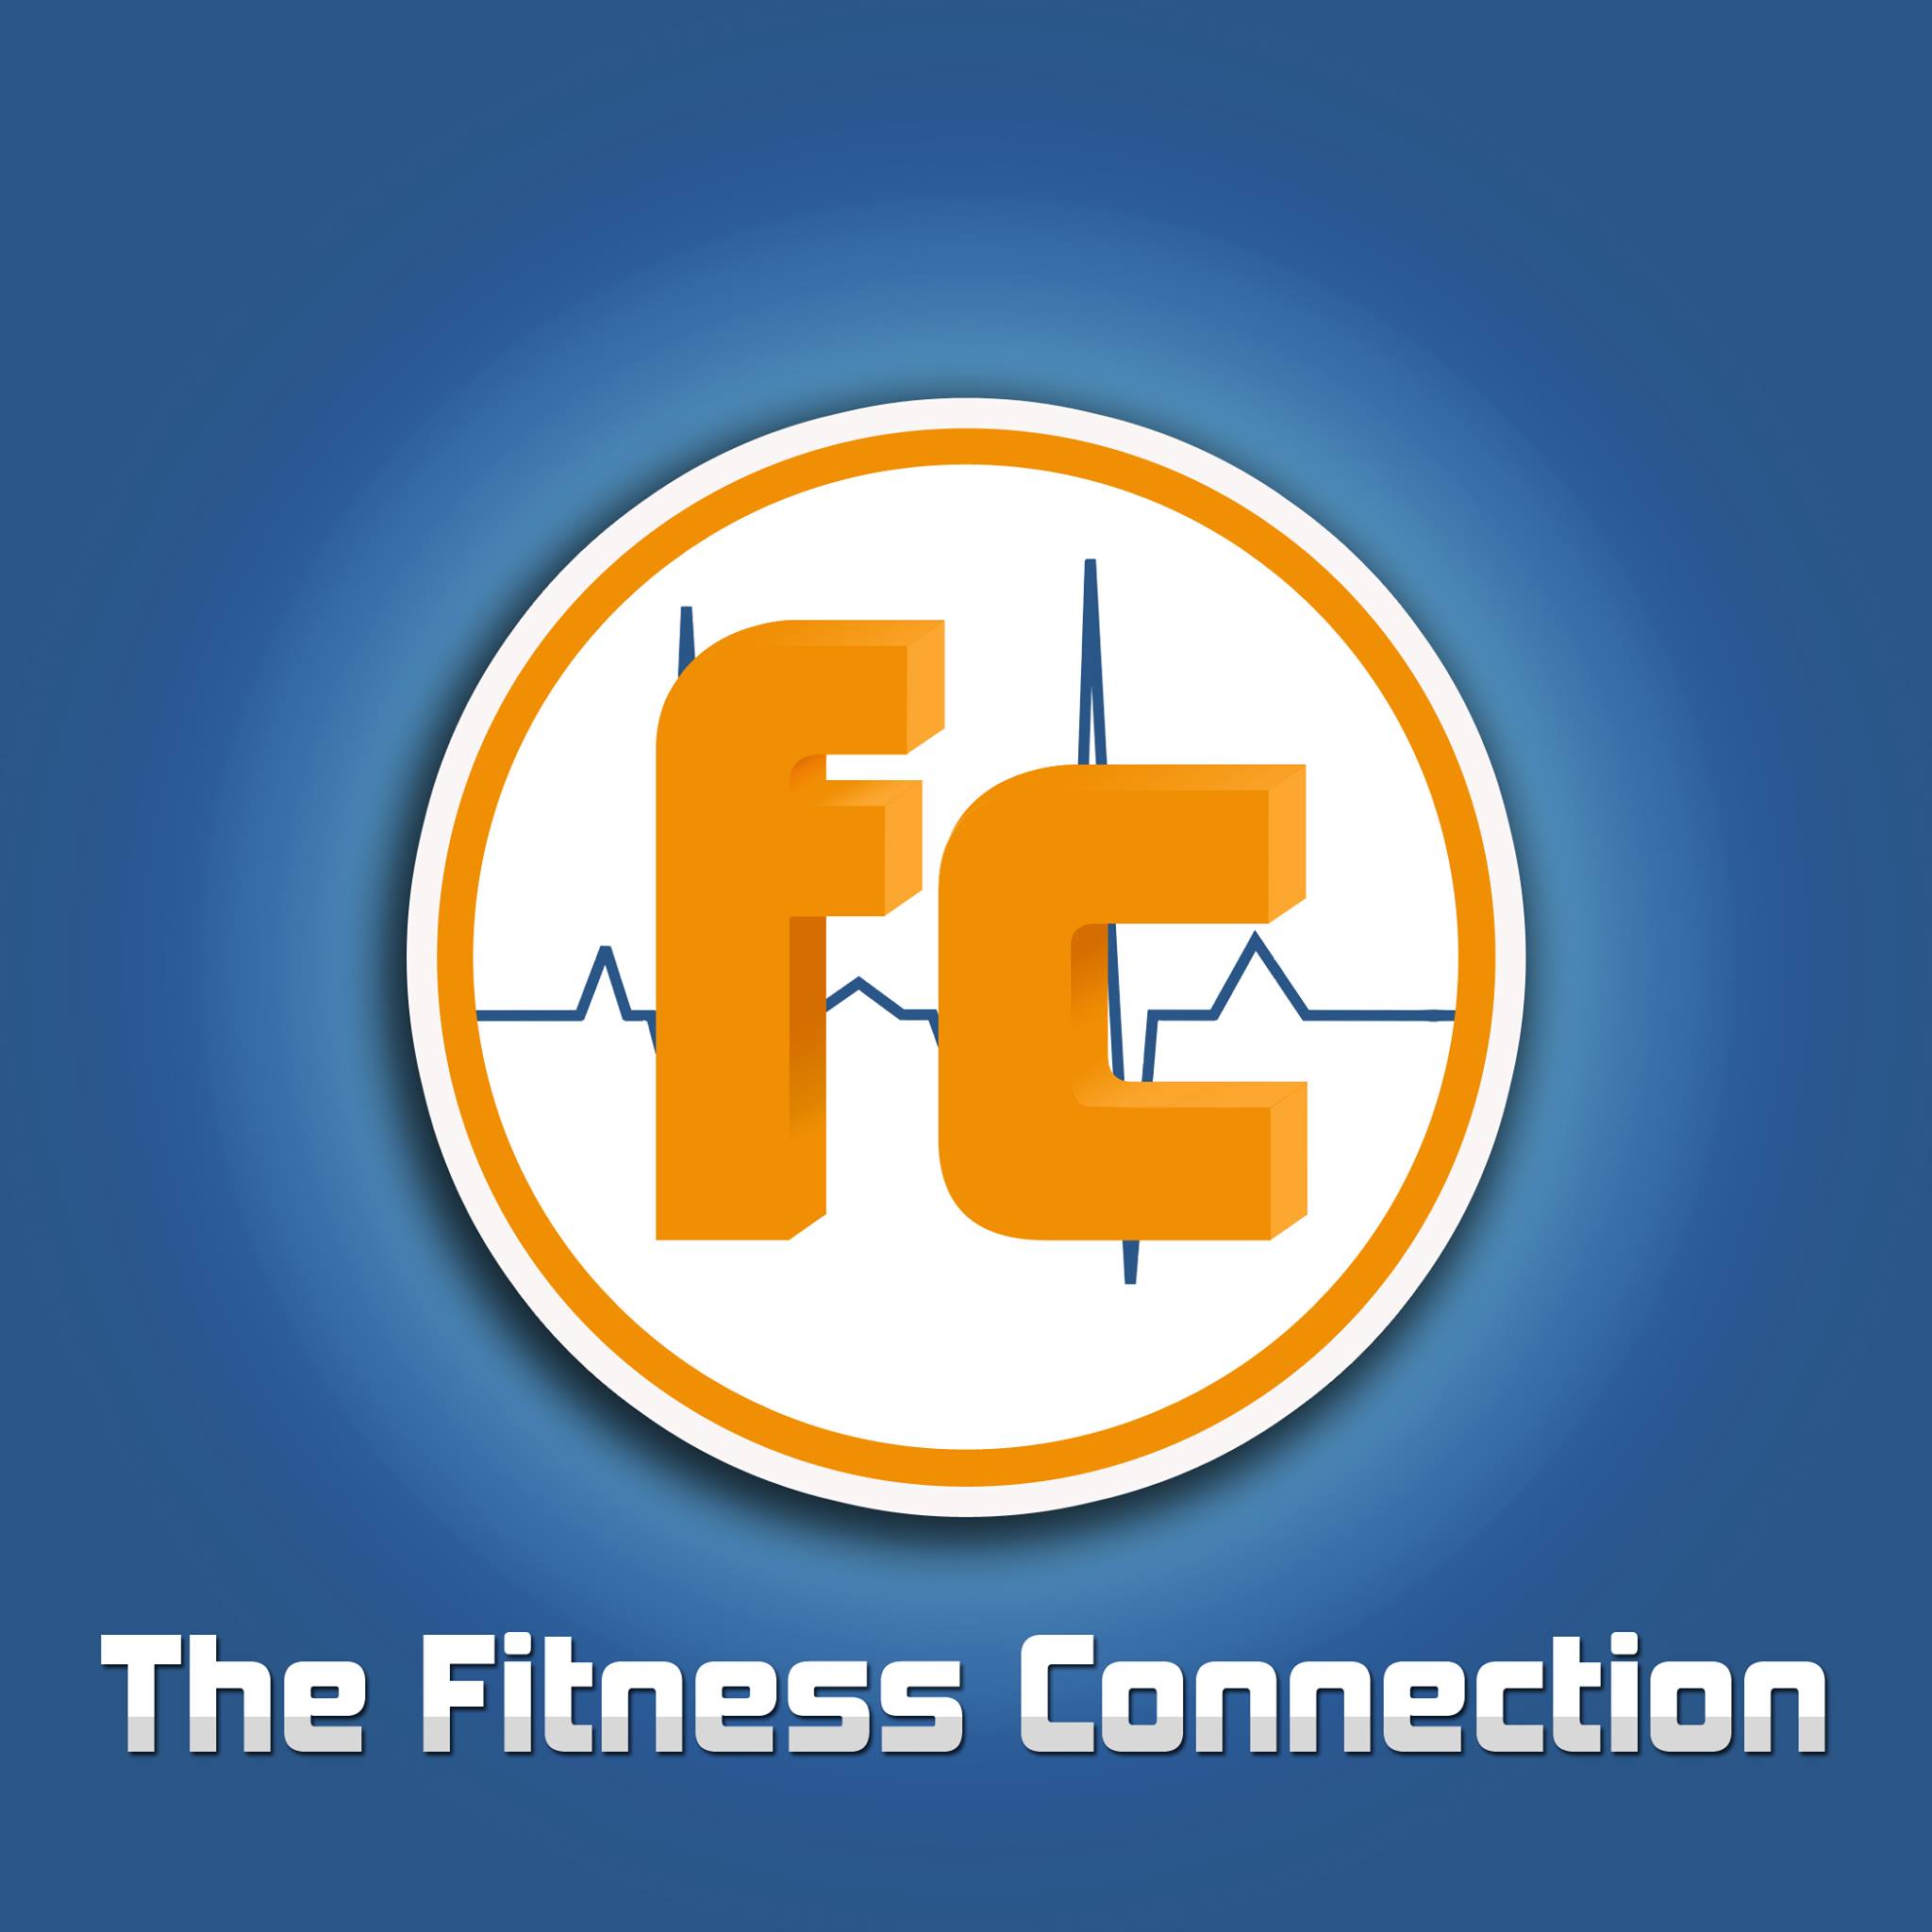 Fitness Connection ltd